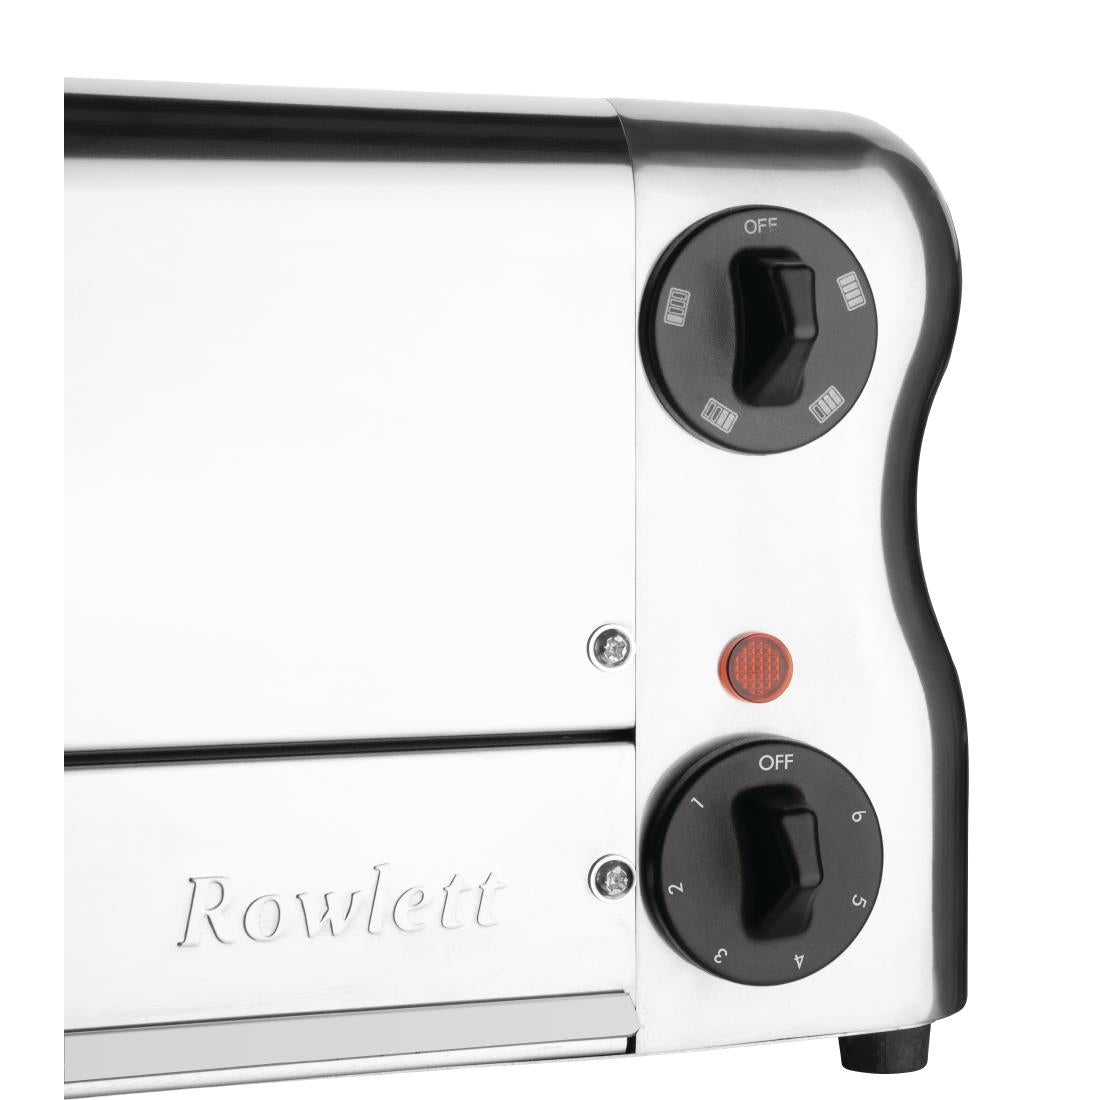 CH181 Rowlett Esprit 4 Slot Toaster Chrome w/2x Additional Elements & Sandwich Cage JD Catering Equipment Solutions Ltd